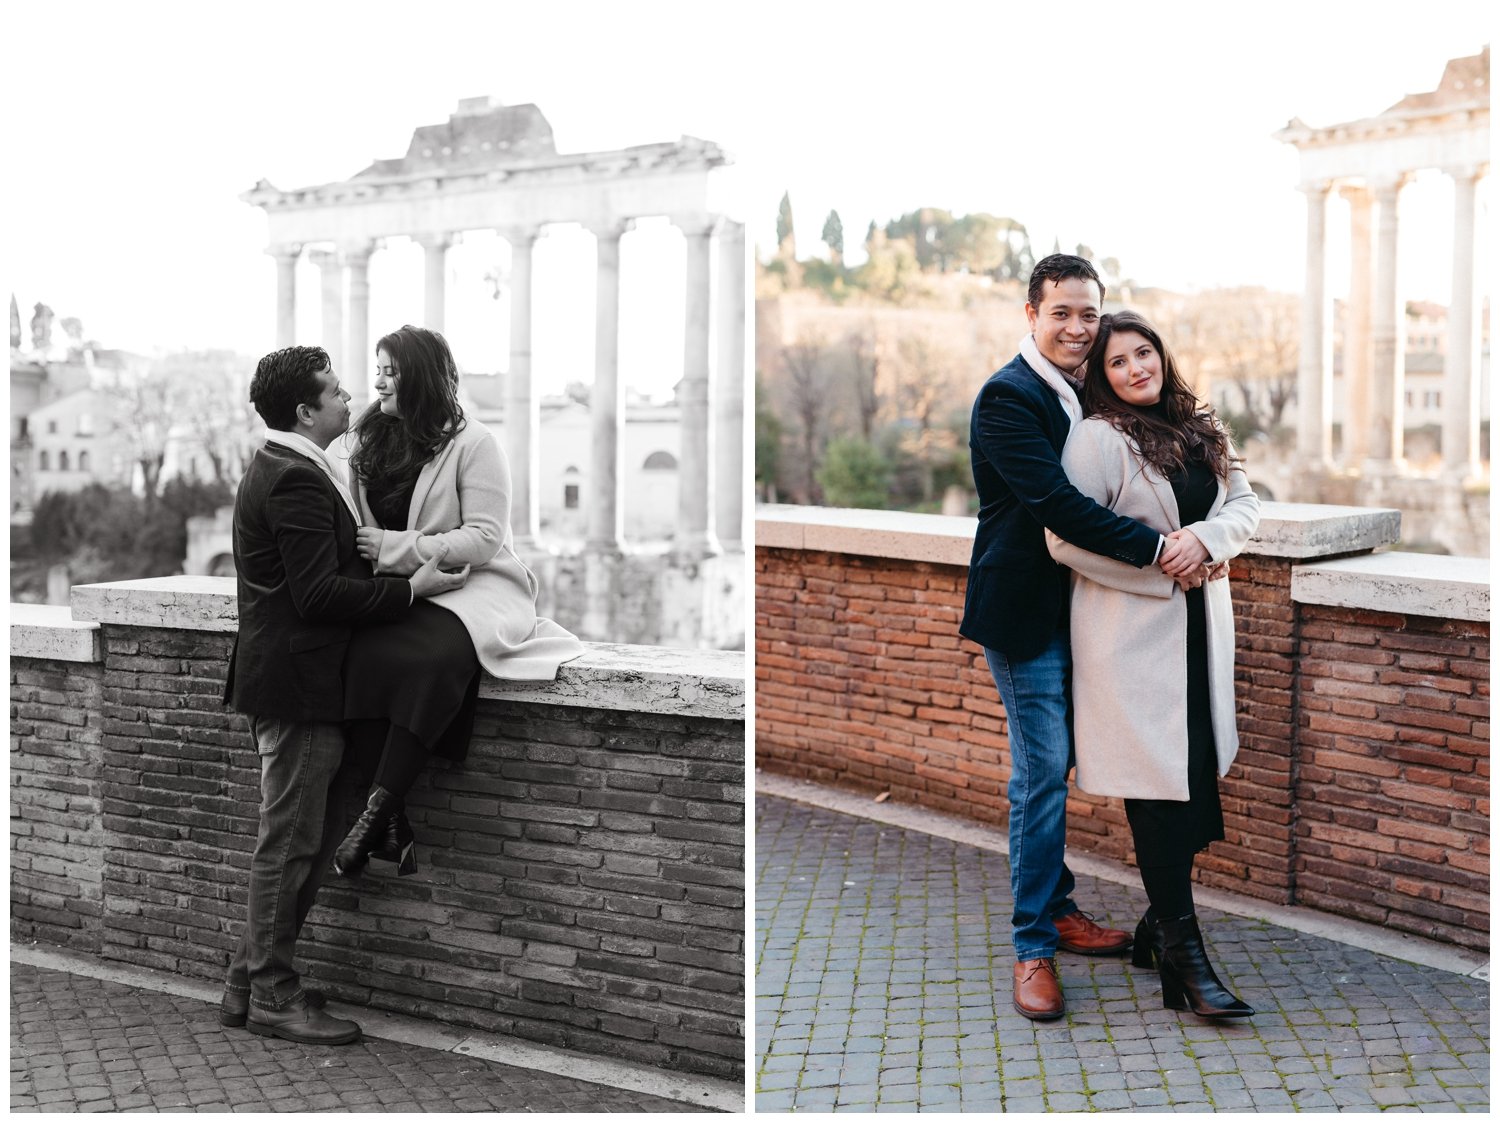 The wedding photographer in Italy with a couple sitting on a wall